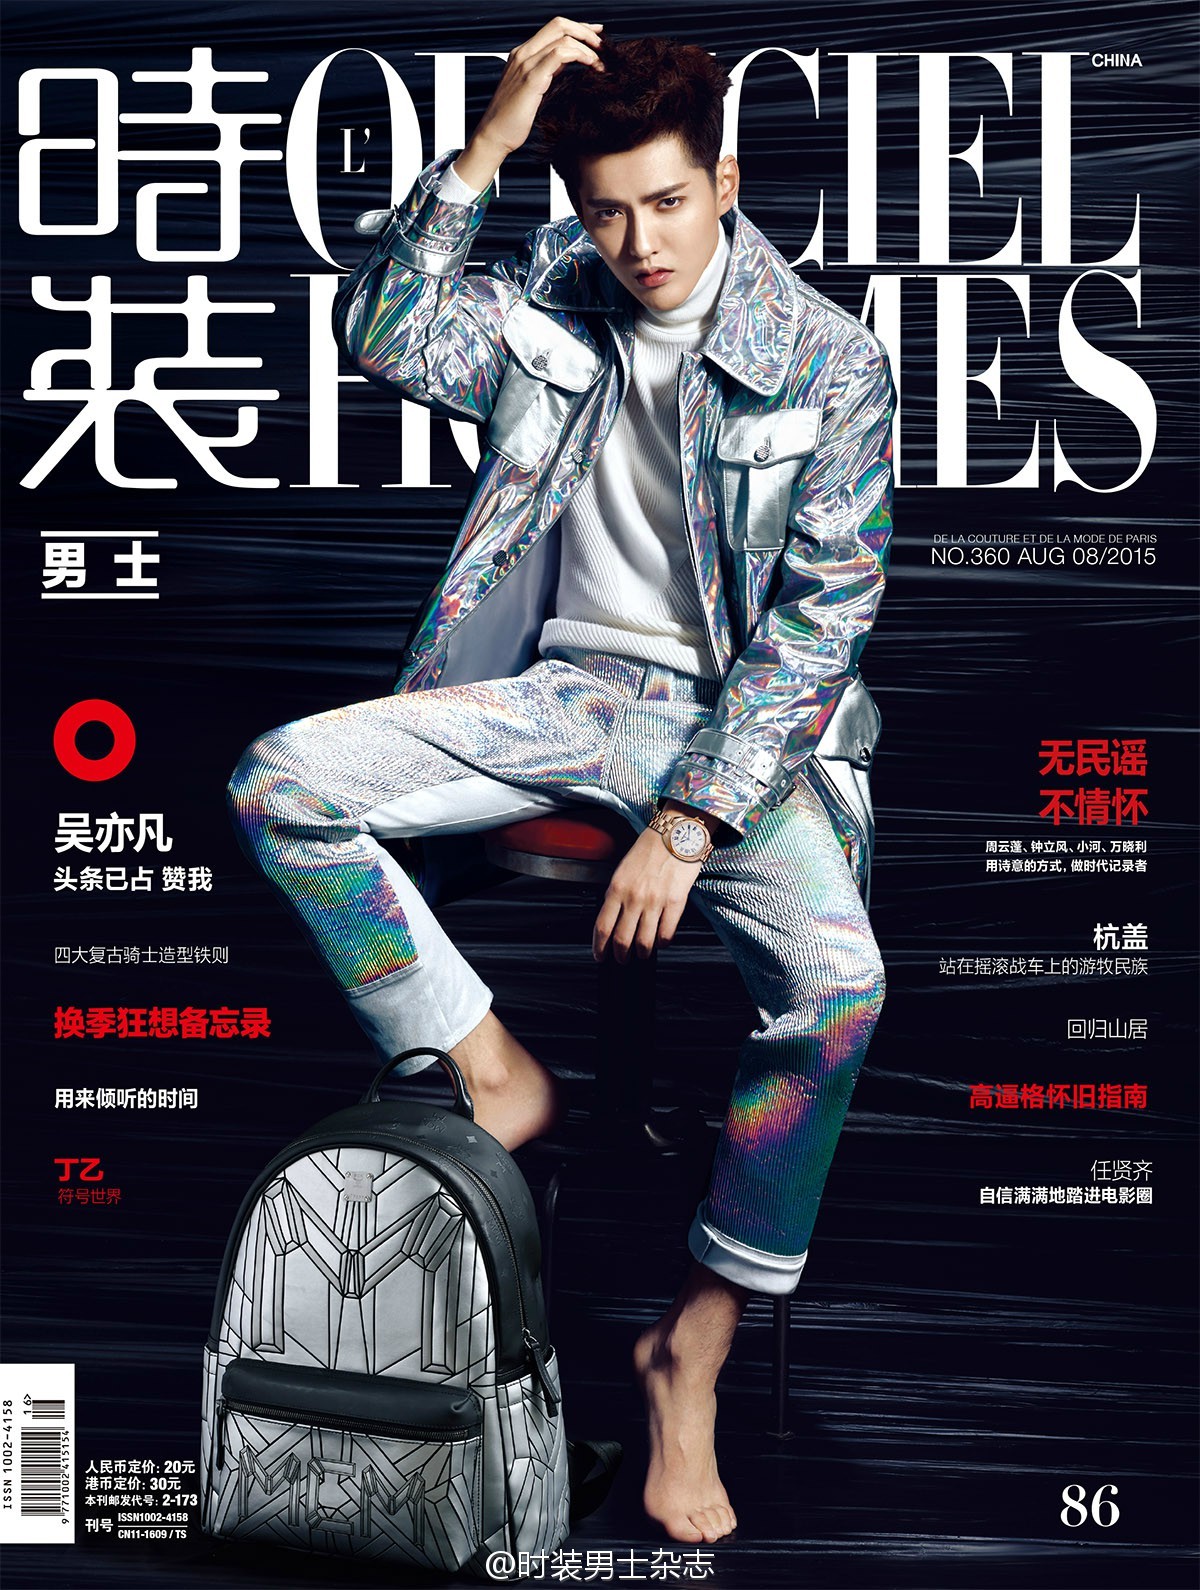 ENG CC] Kris Wu for StyleTv: Funny Male God Edition 